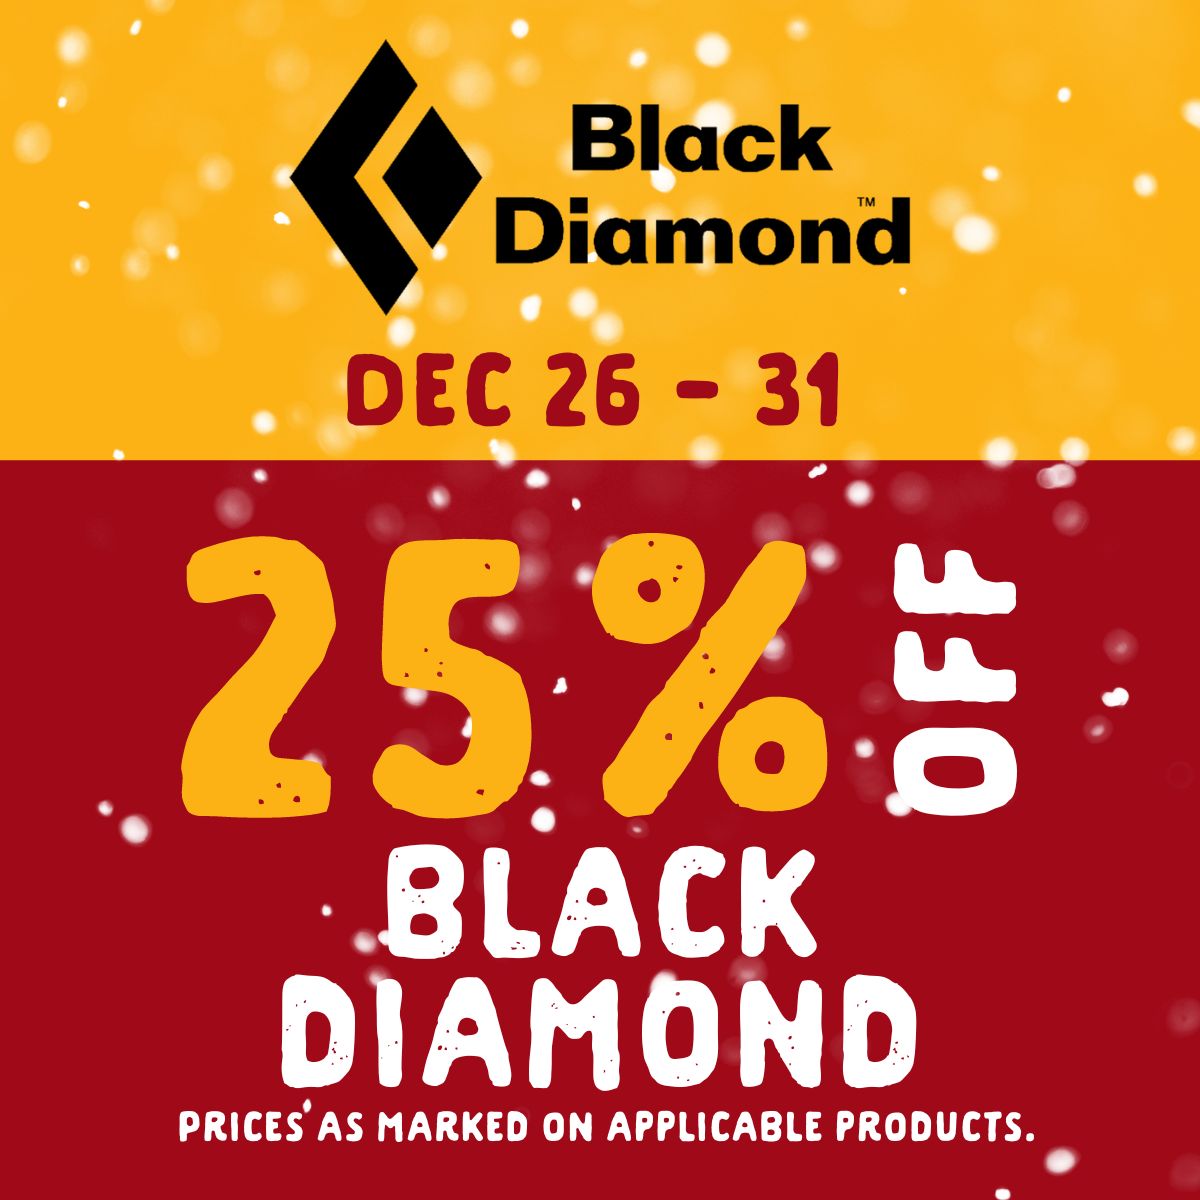 25% off Black Diamond from December 26 to 31. Prices as marked on applicable products.